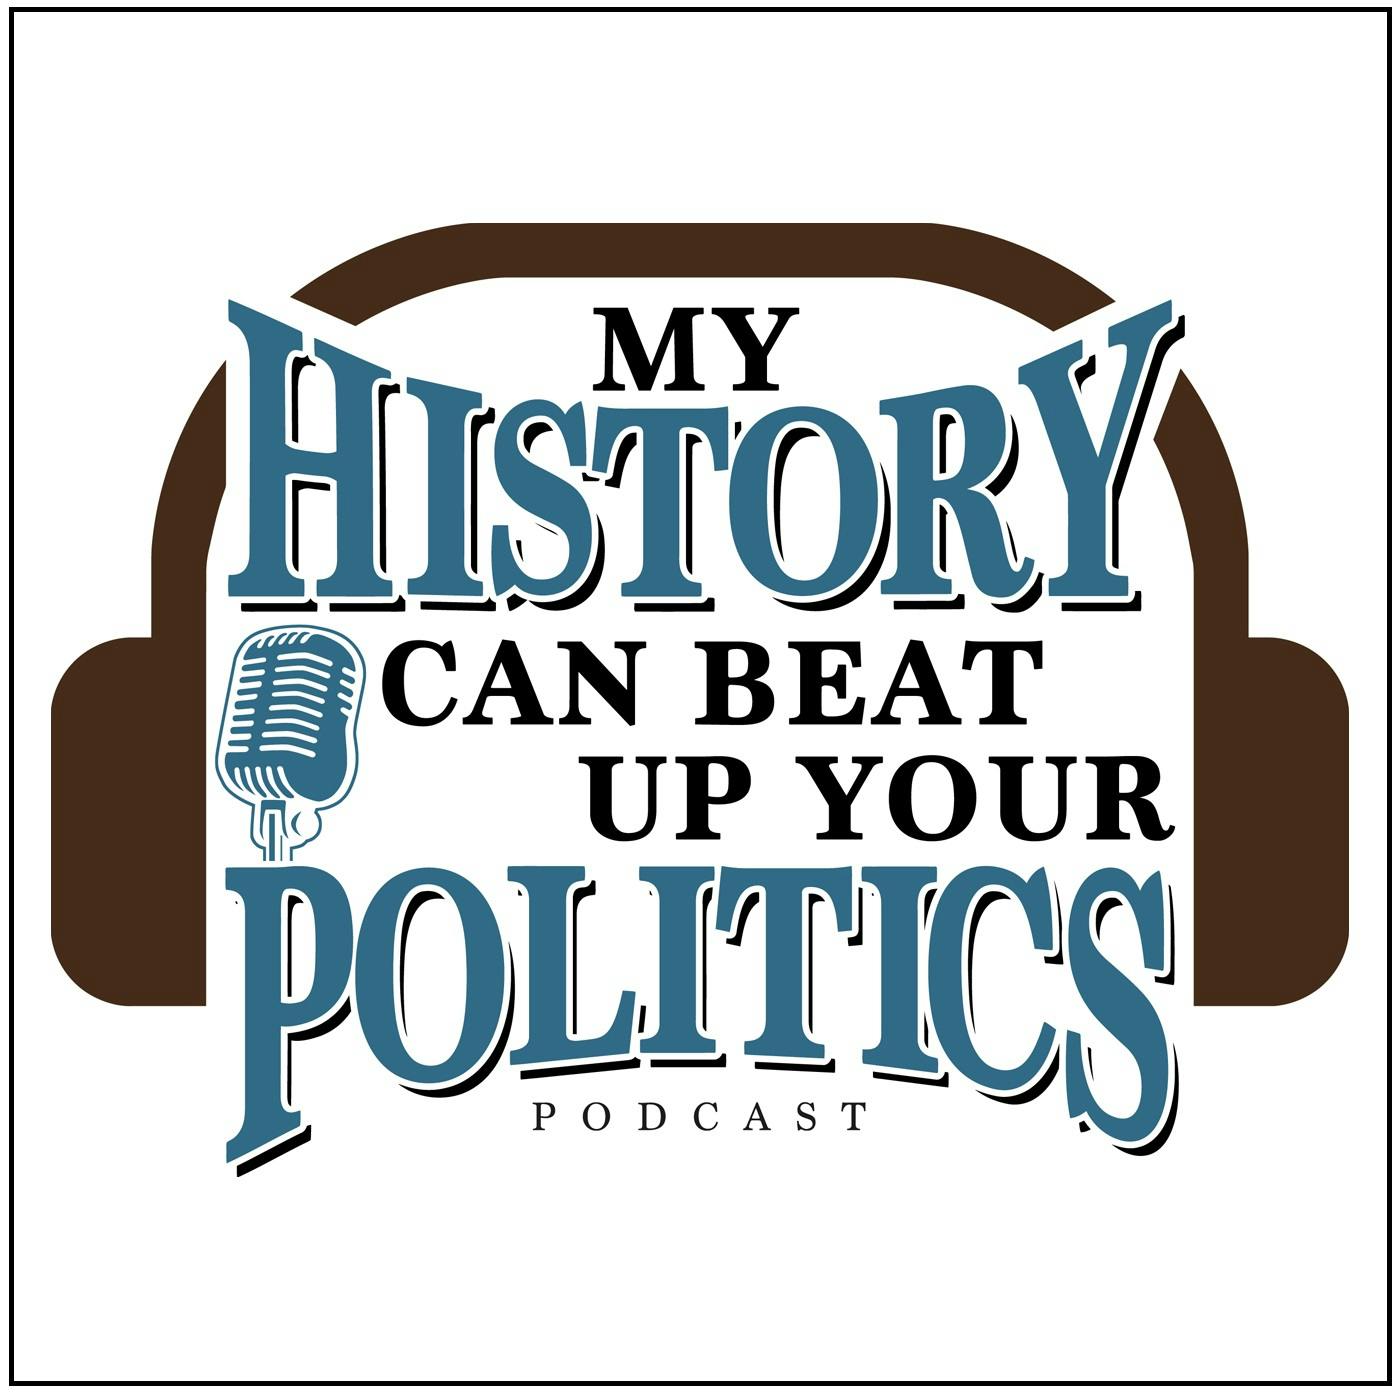 Curtis LeMay, Warrior, Candidate - with Alex Hastie of Ohio v. The World Podcast